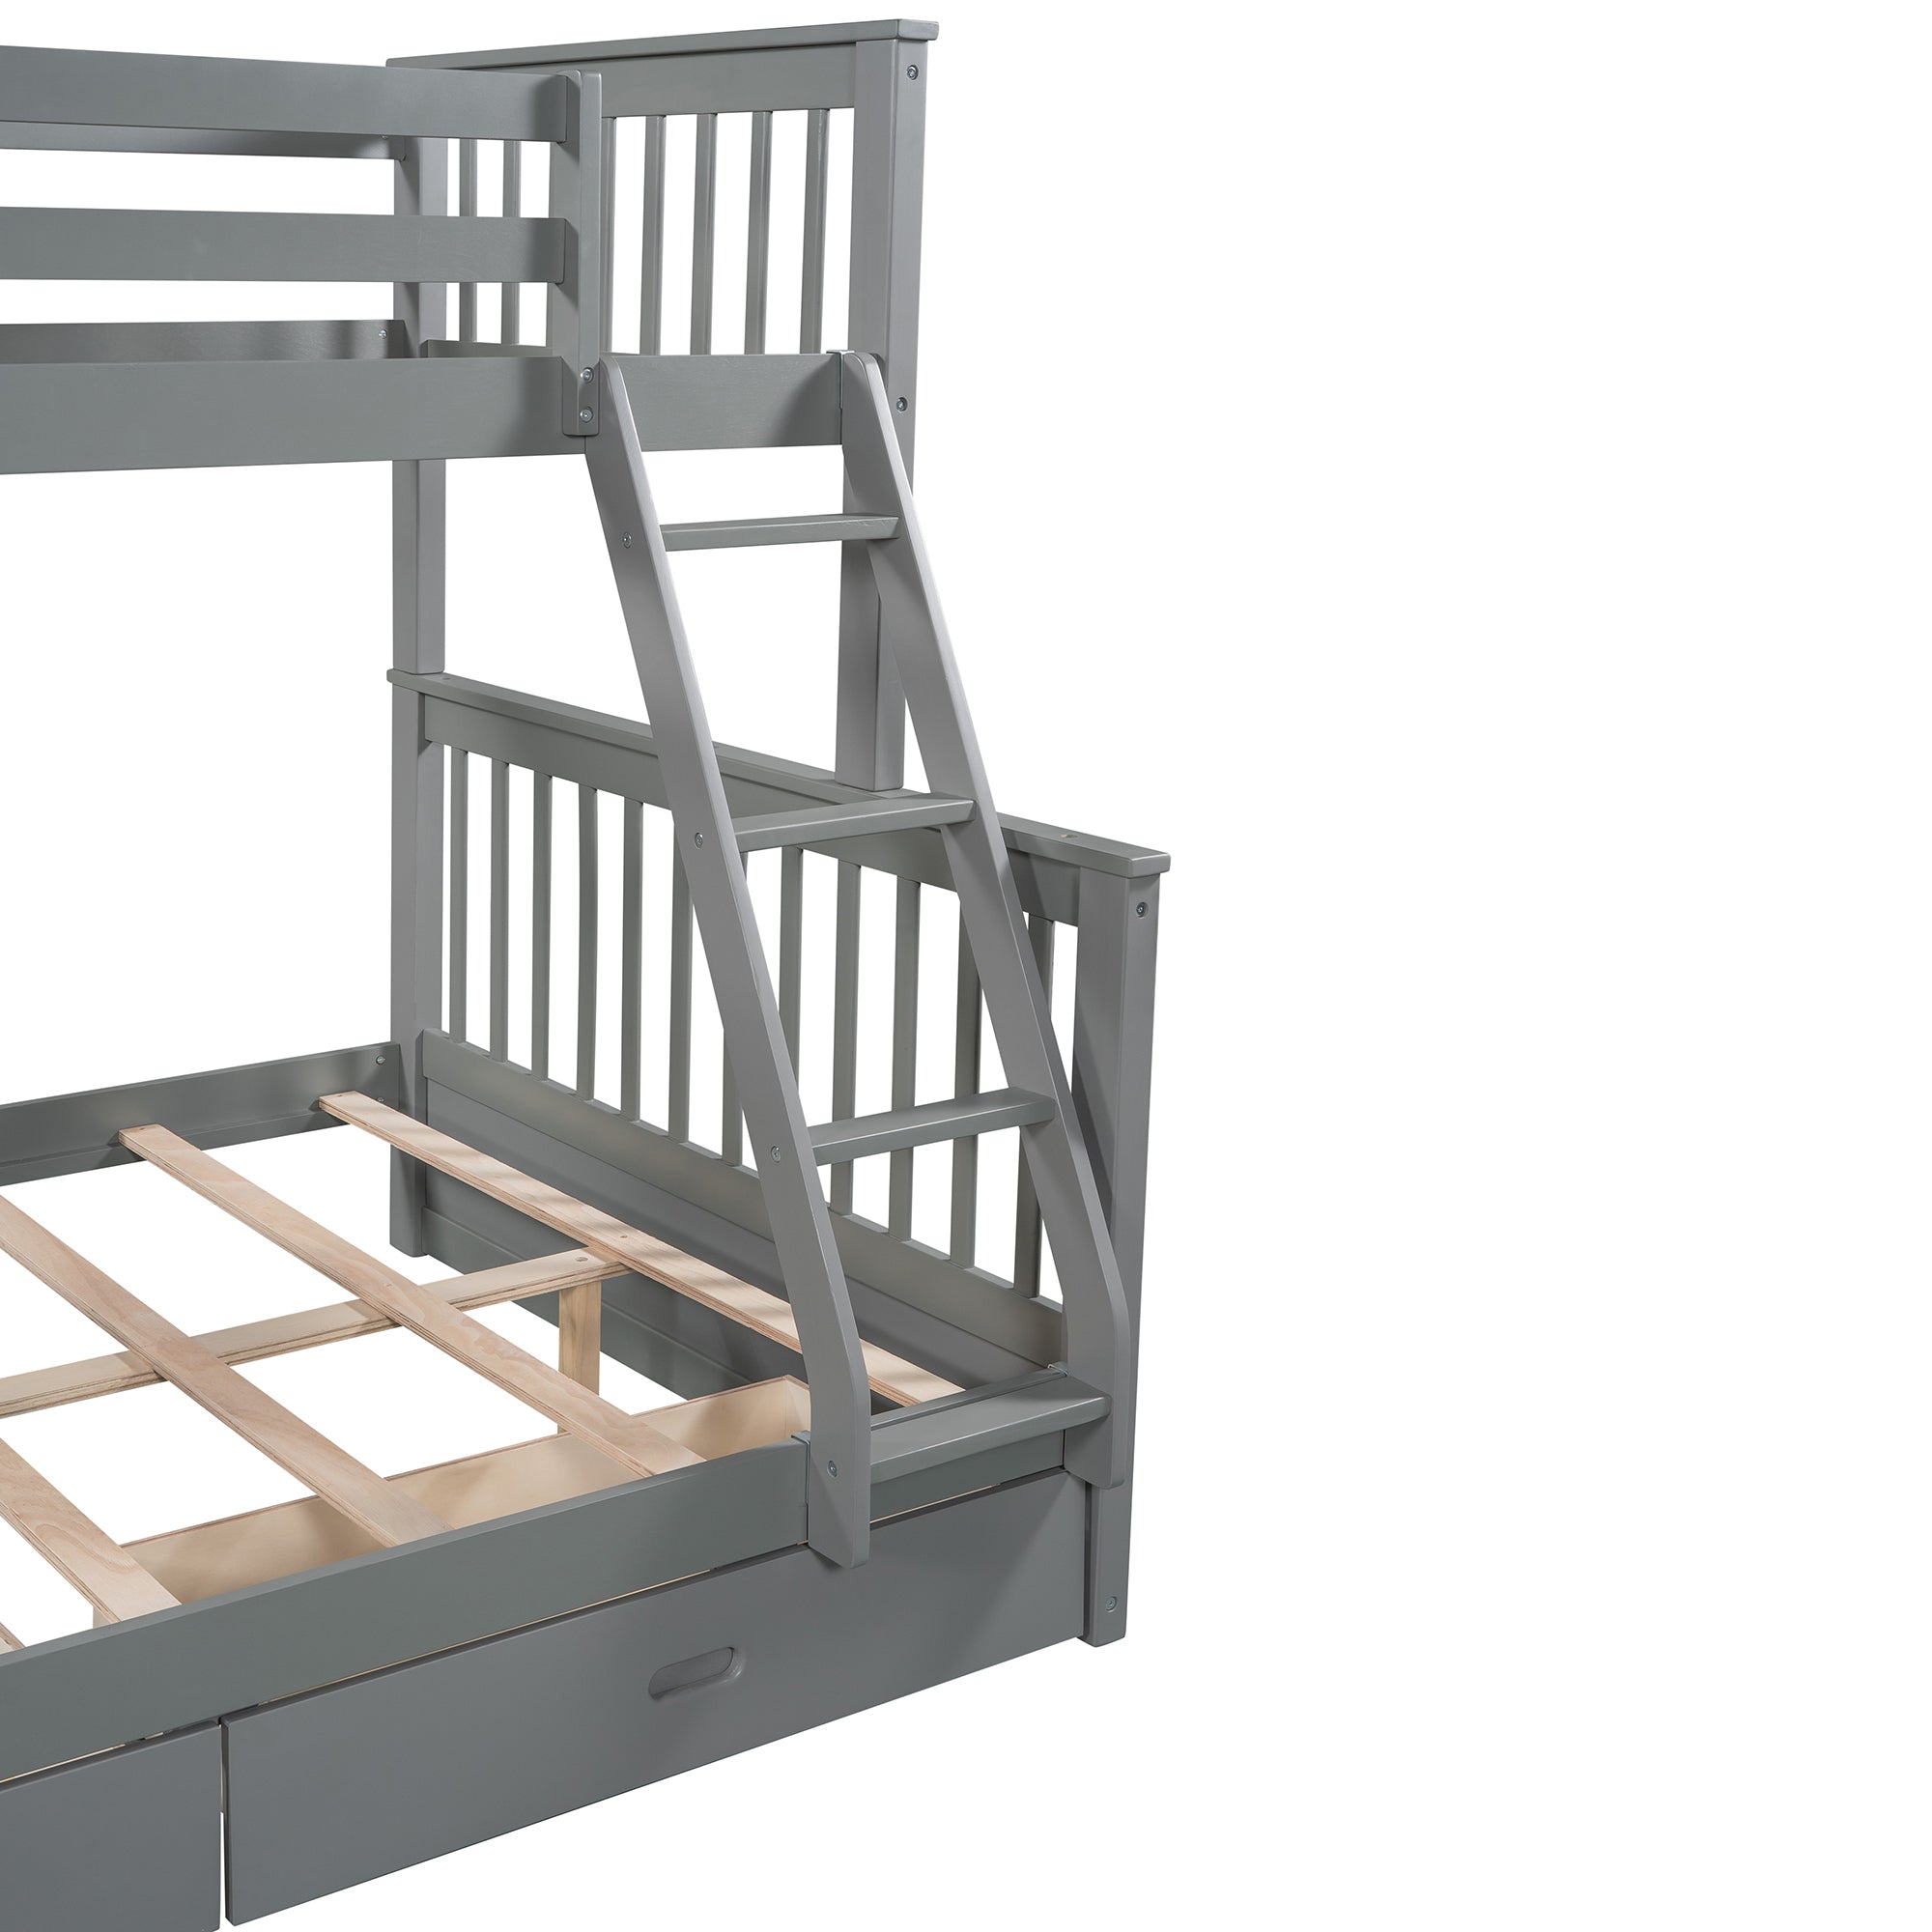 Twin-Over-Full Bunk Bed with Ladders and Two Storage Drawers (Gray)